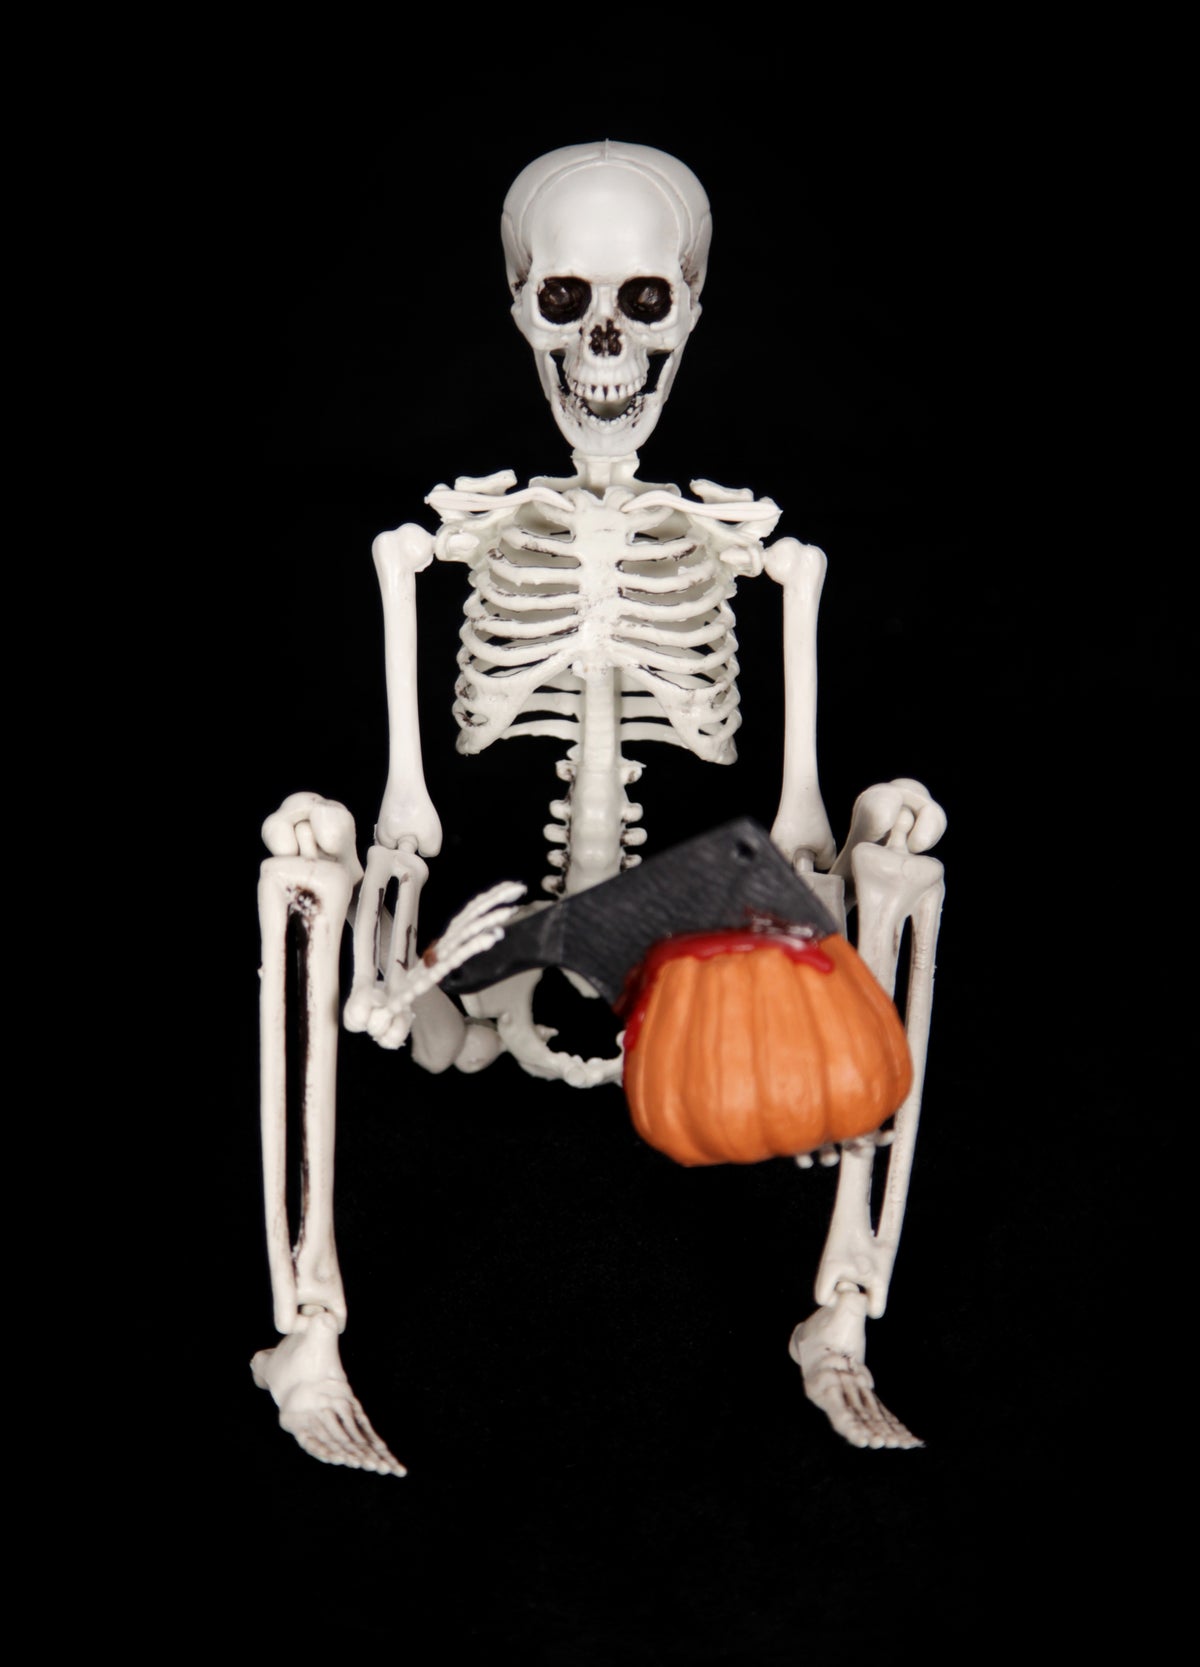 Boo! Posable Skeleton with Pumpkin &amp; Knife | 40cm